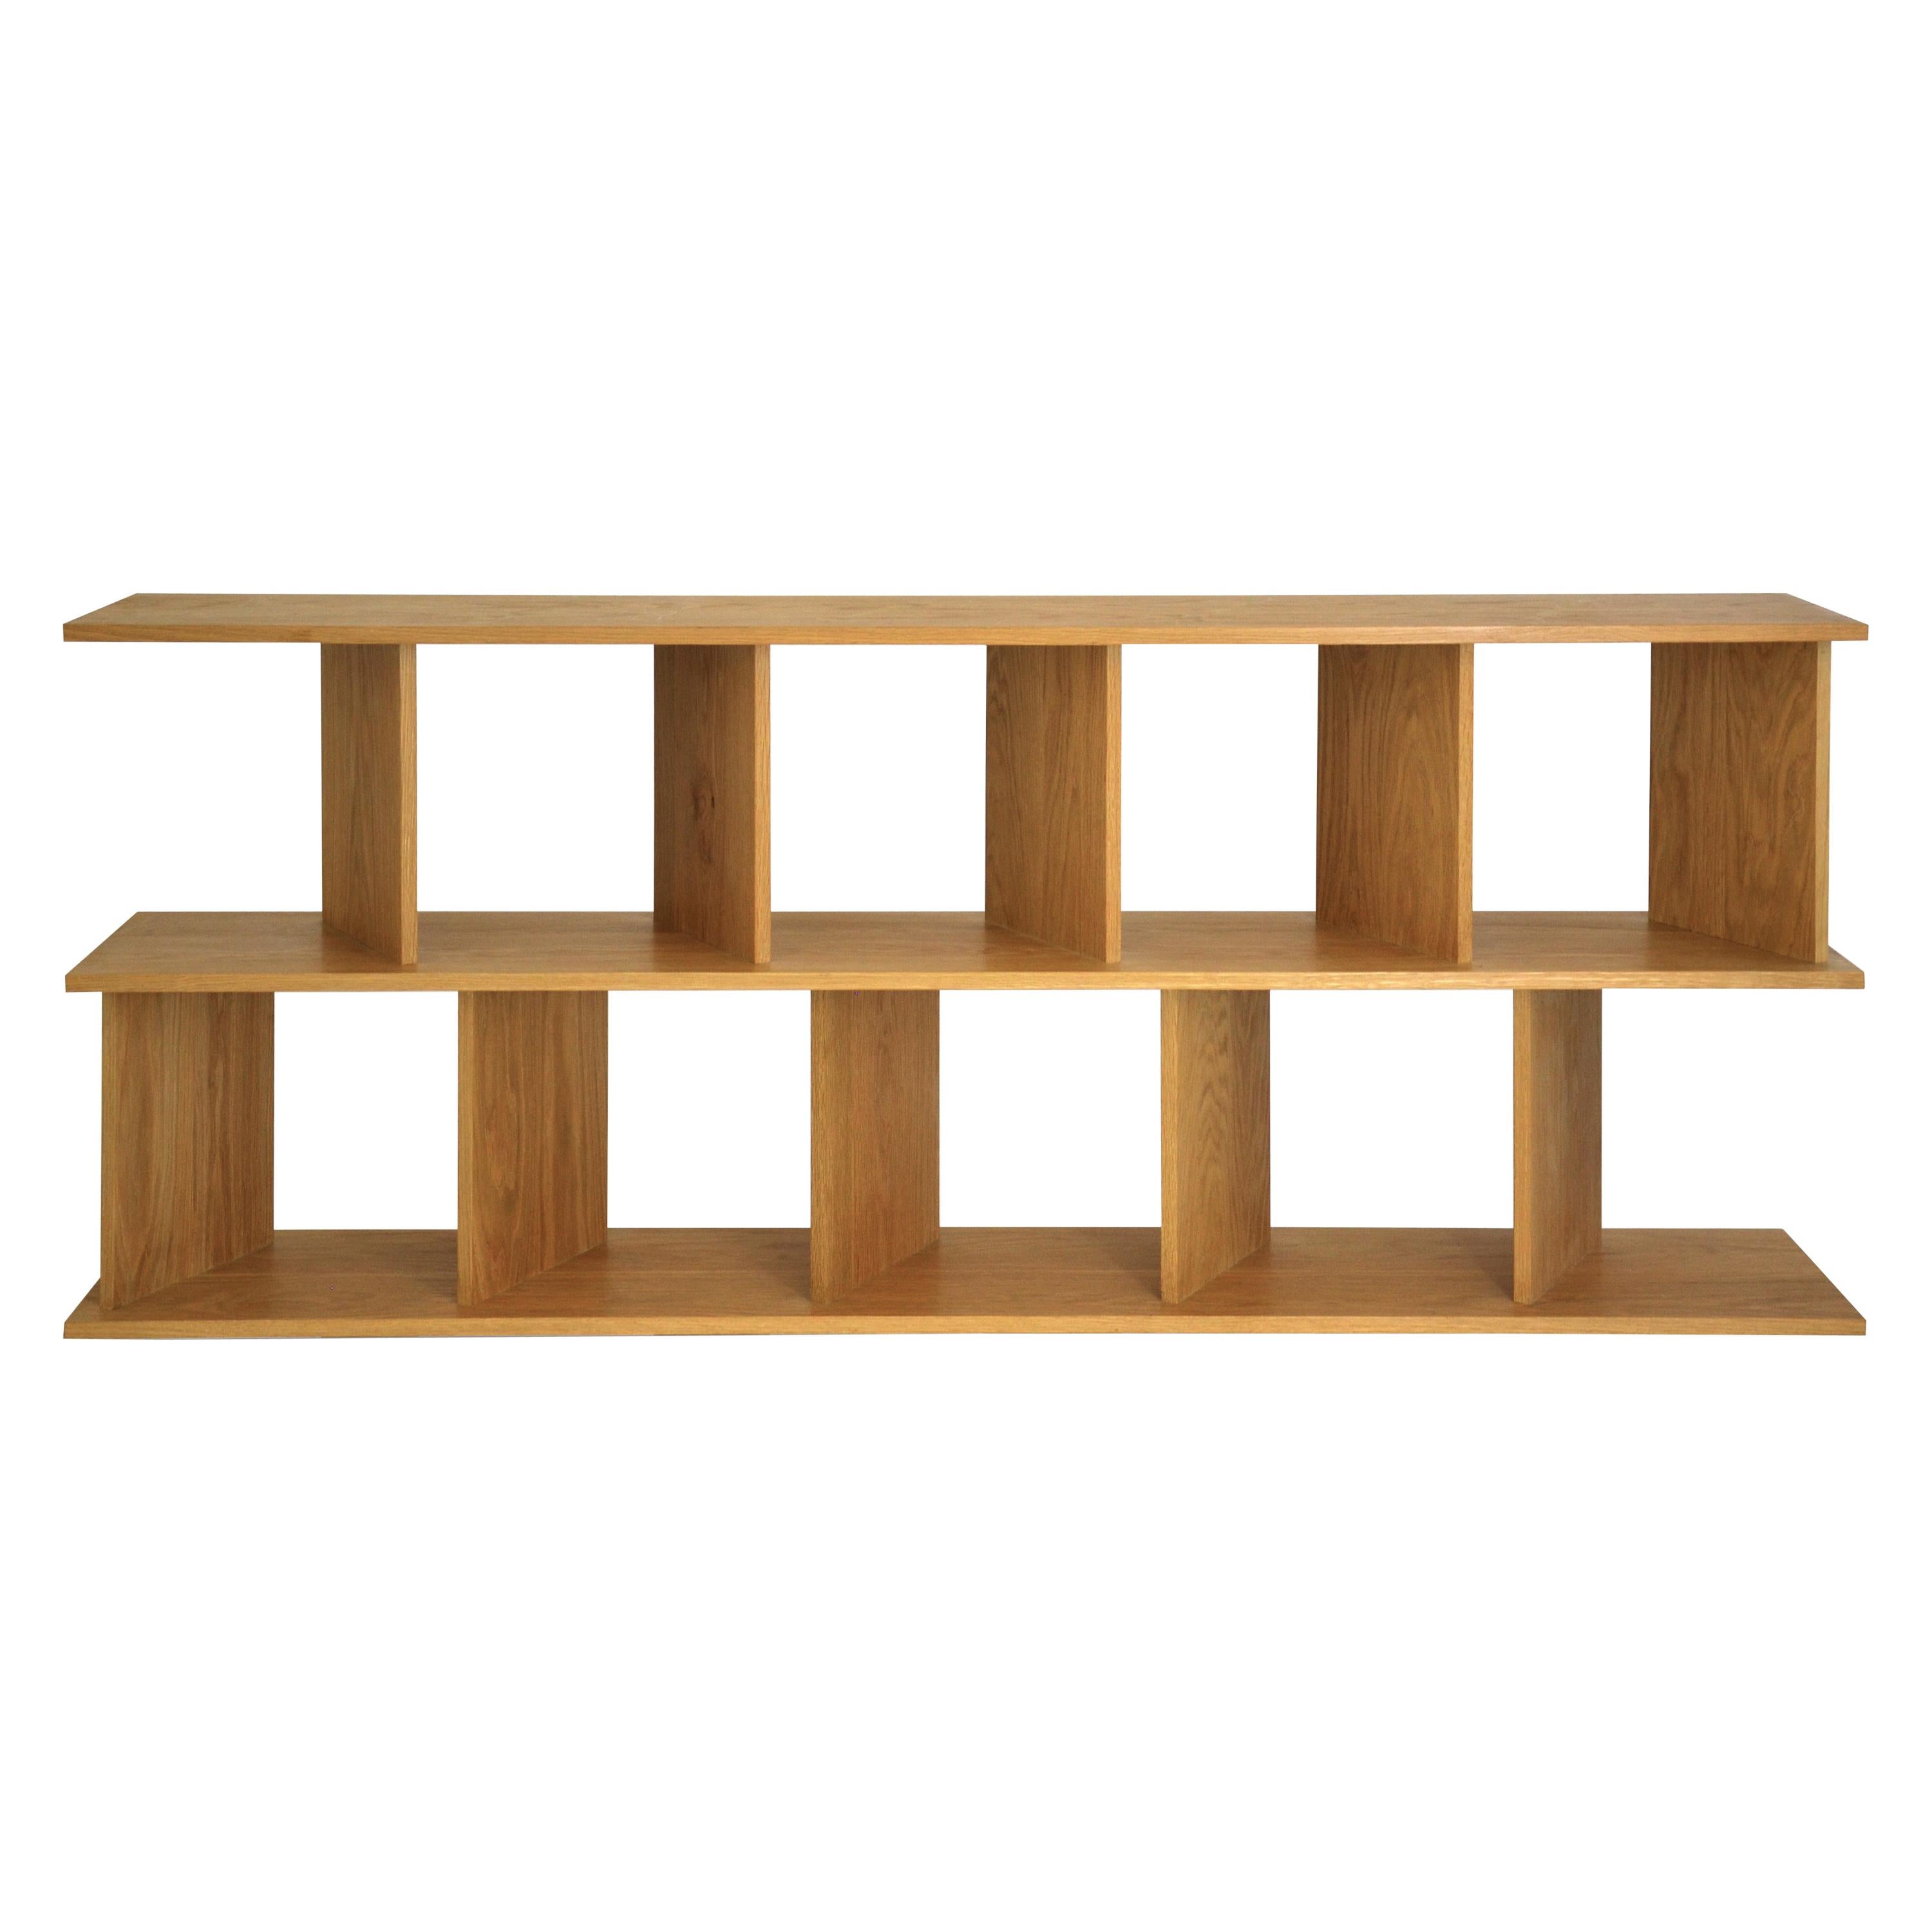 Contemporary Room Divider Shelving "30/30 S" in Oak by Casey Lurie Studio